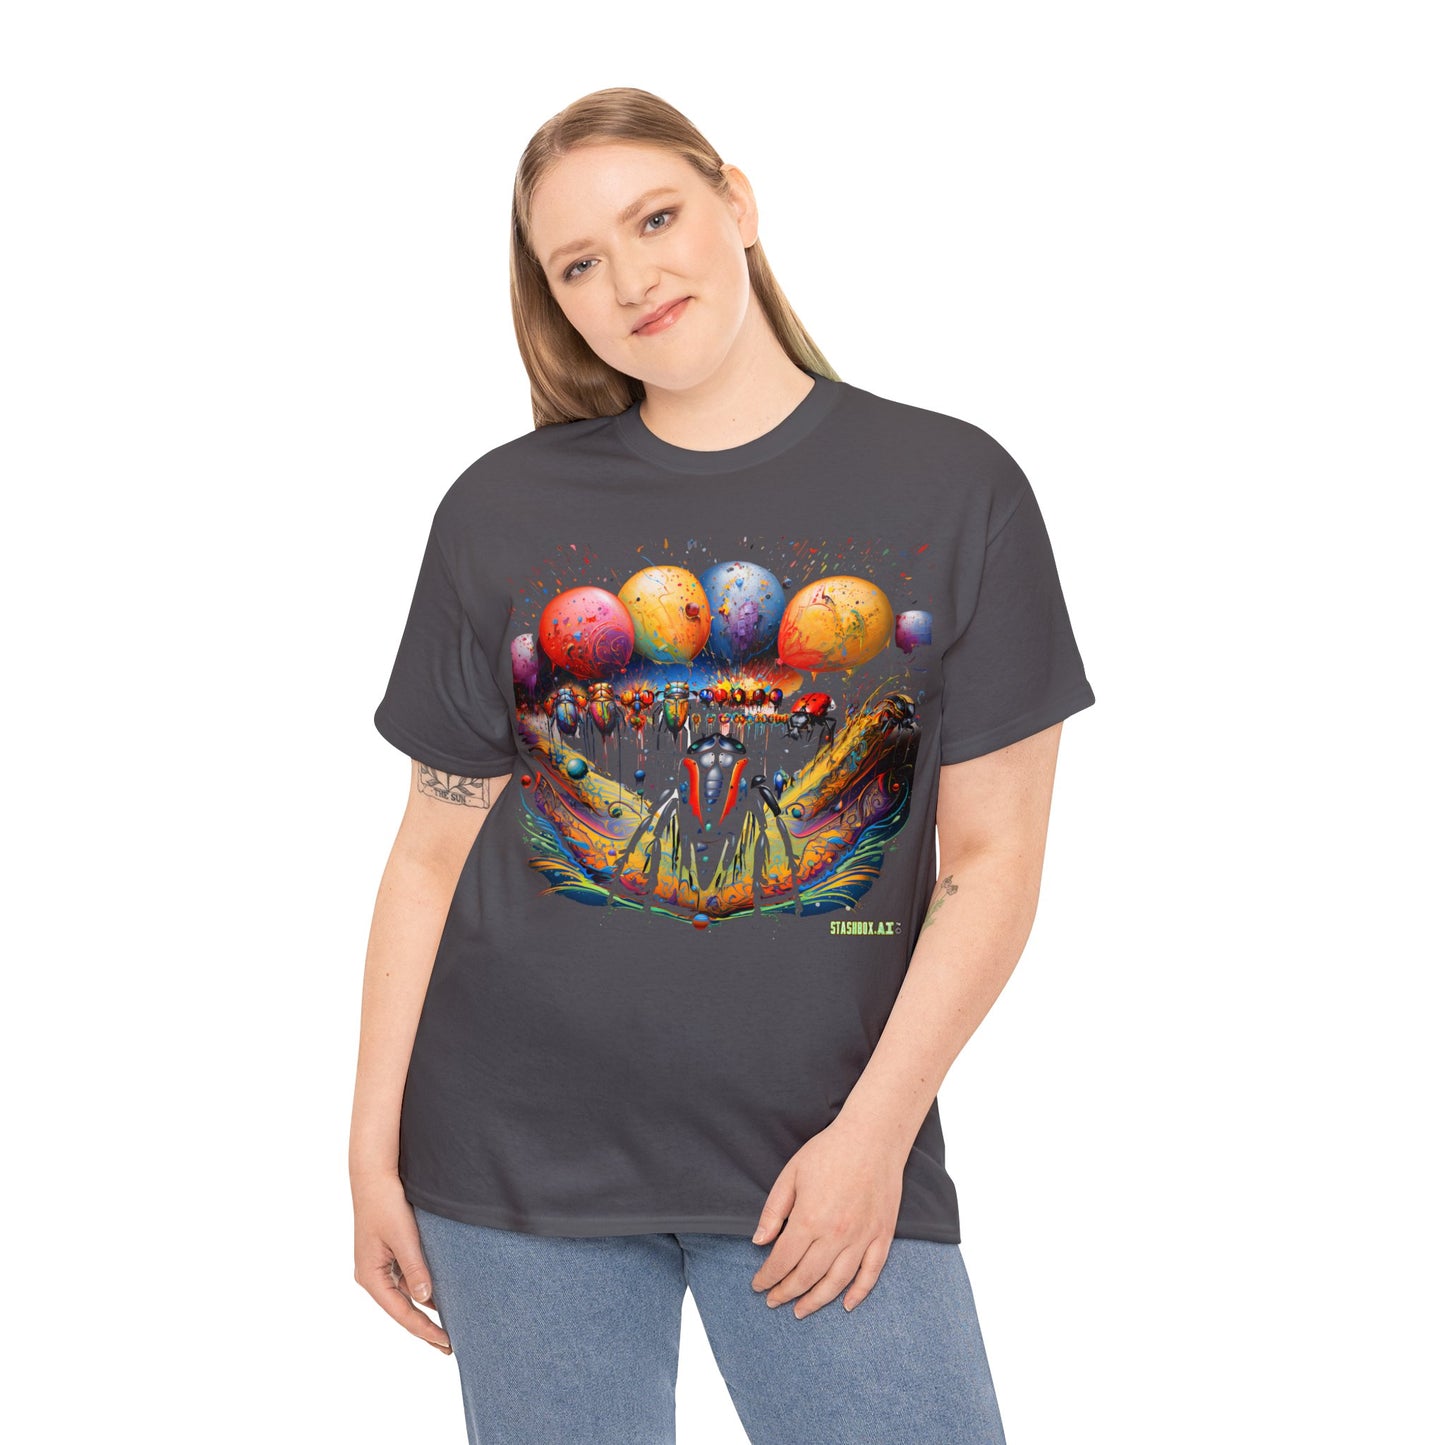 Unisex Adult Size Heavy Cotton Tee Colorful Bugs 003 T-Shirt